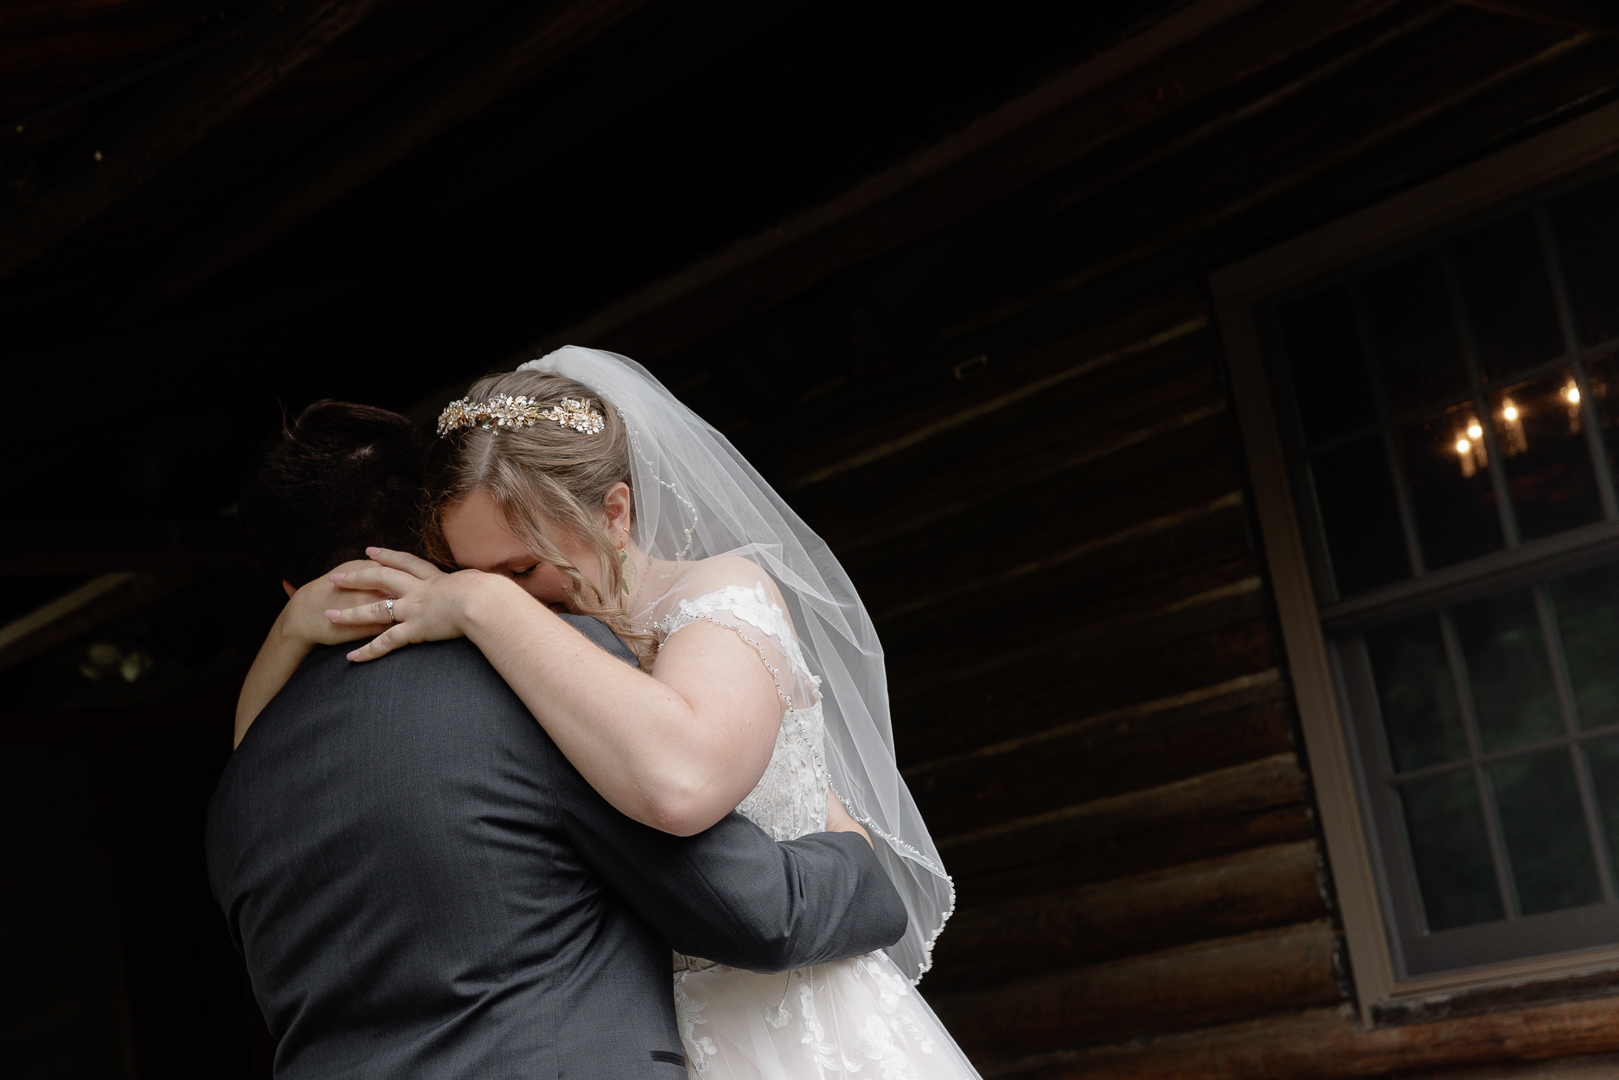 A bride and groom have a tearful embrace at their wedding at Rutgers Gardens and Suydam Farms